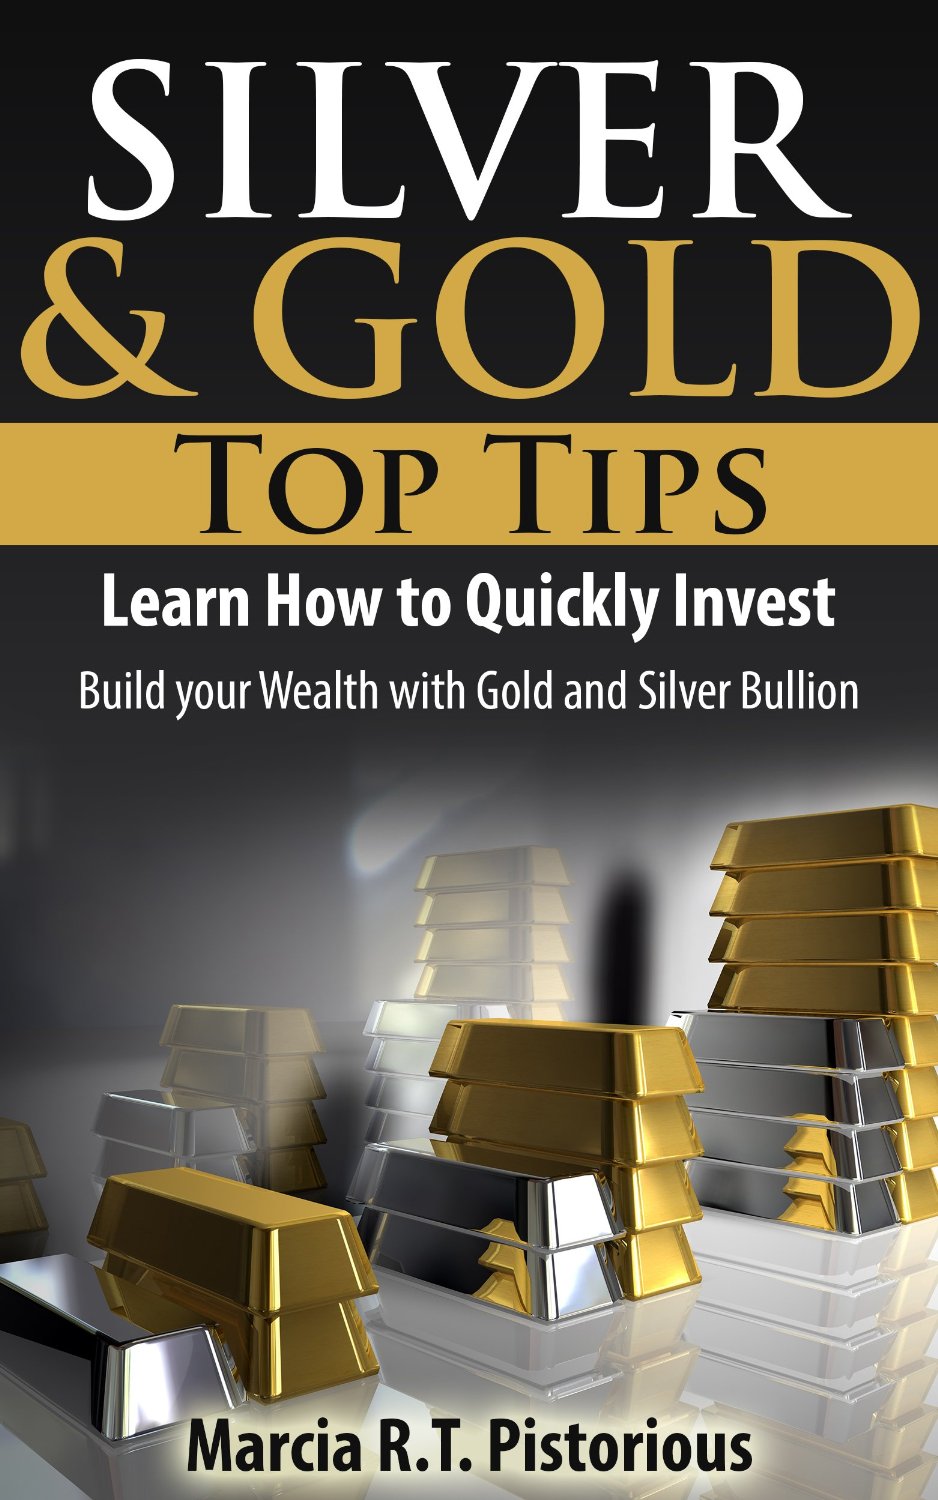 Silver & Gold Guide Top Tips: Learn How to Quickly Invest – Build your Wealth with Gold and Silver Bullion by Marcia R.T. Pistorious